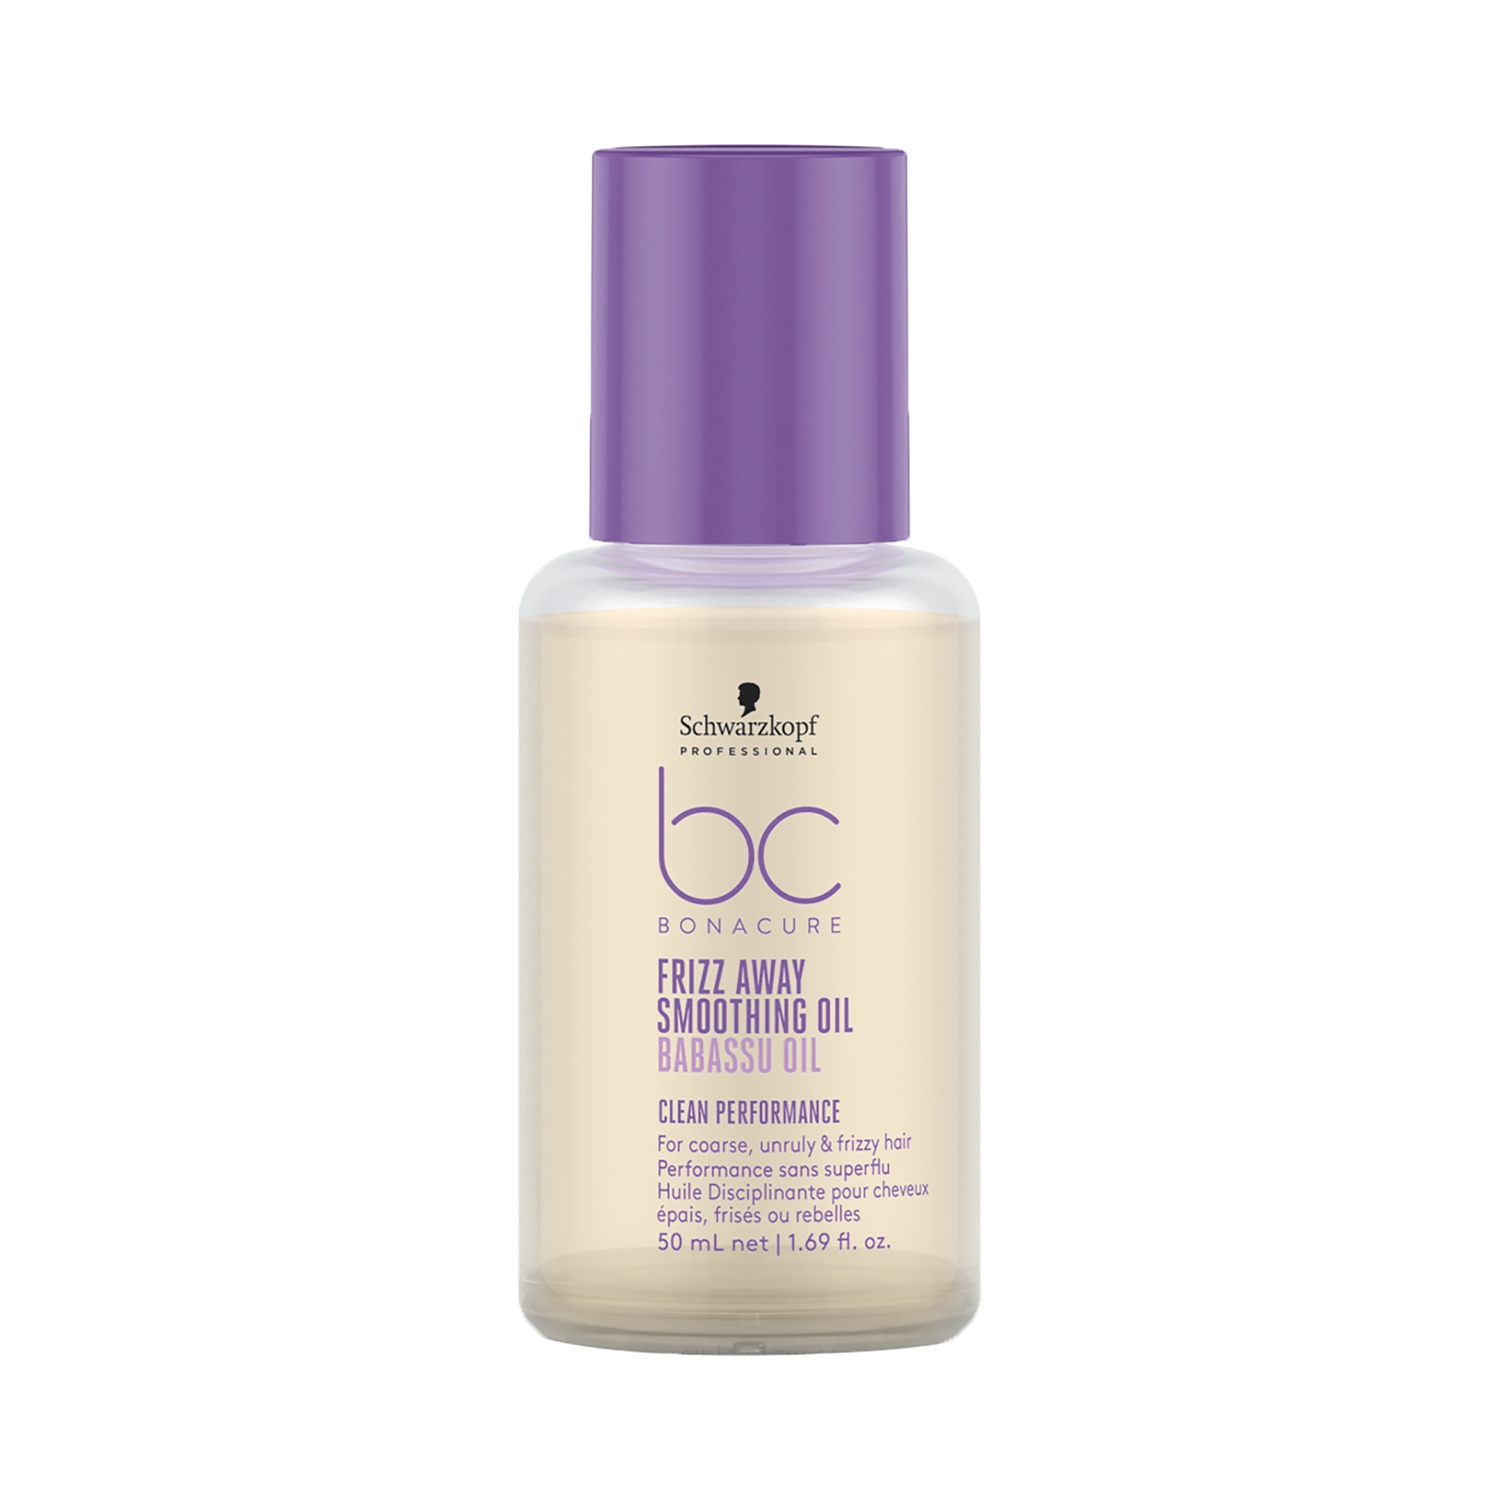 Schwarzkopf Professional | Schwarzkopf Professional Bonacure Frizz Away Smoothing Oil With Babassu Oil (50ml)